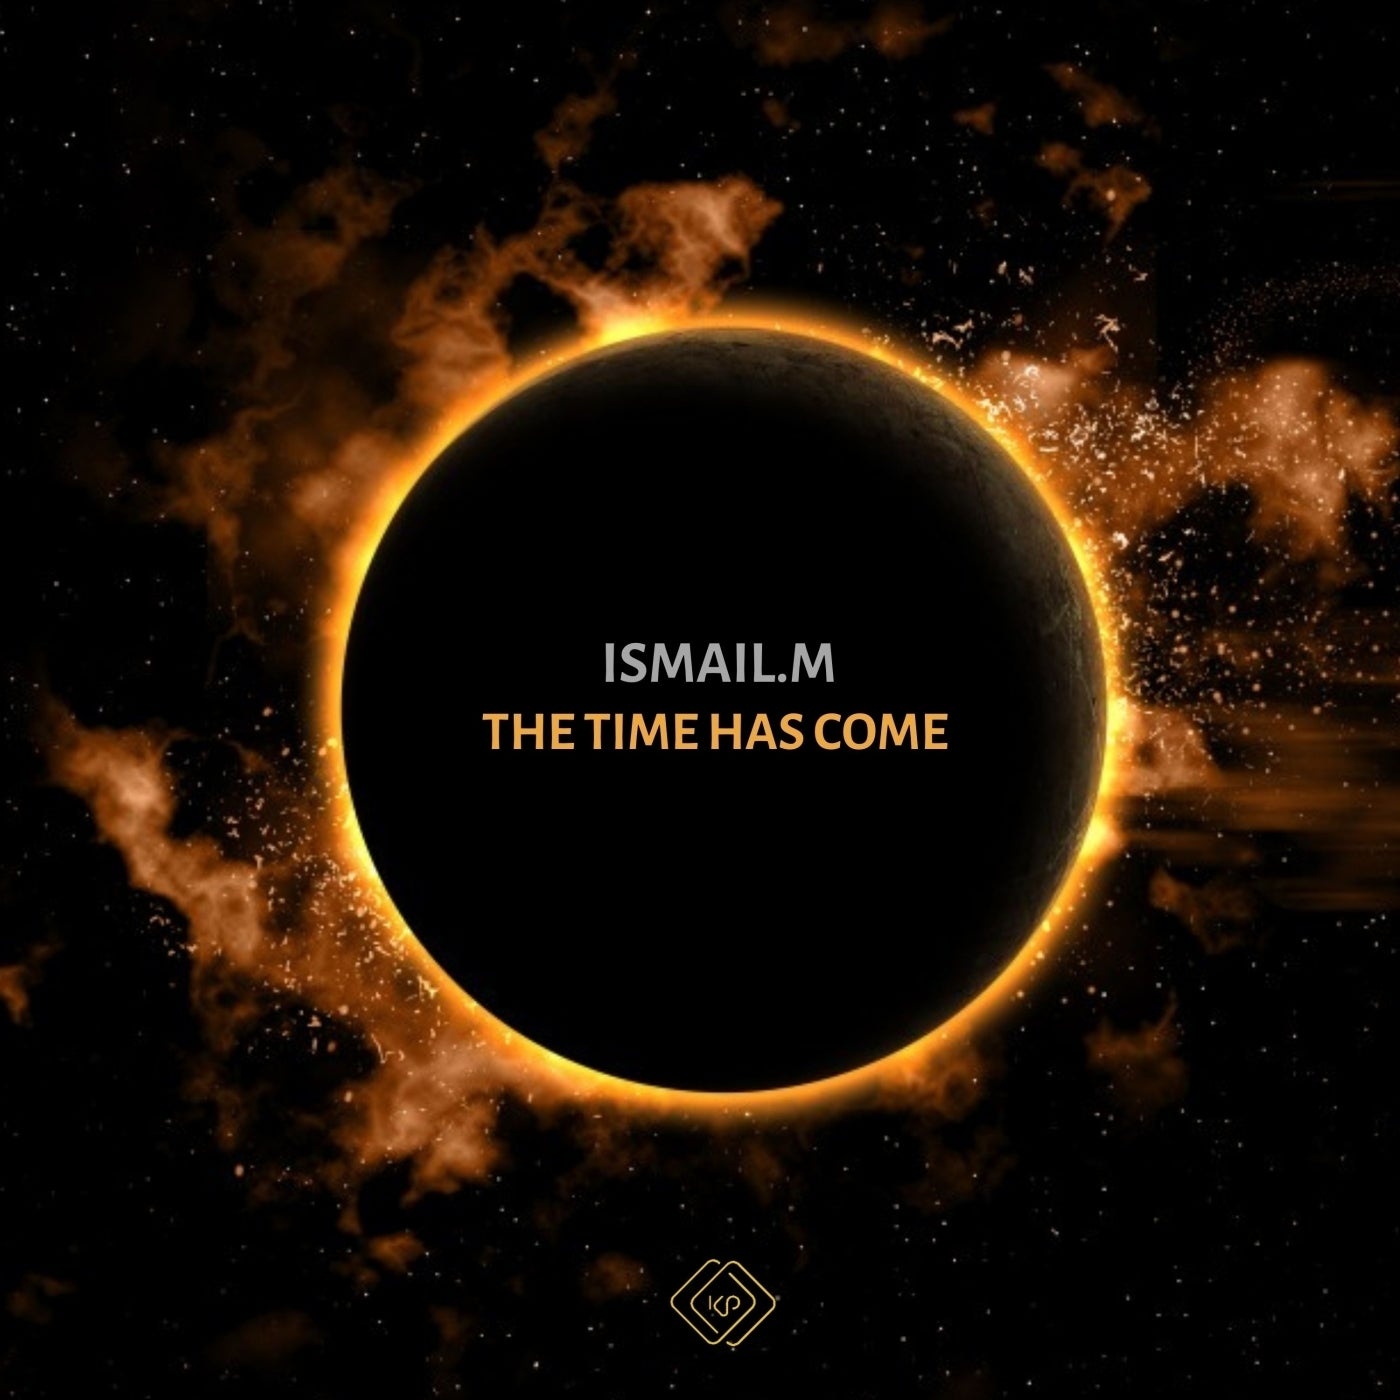 ISMAIL.M - The Time Has Come [KP574]